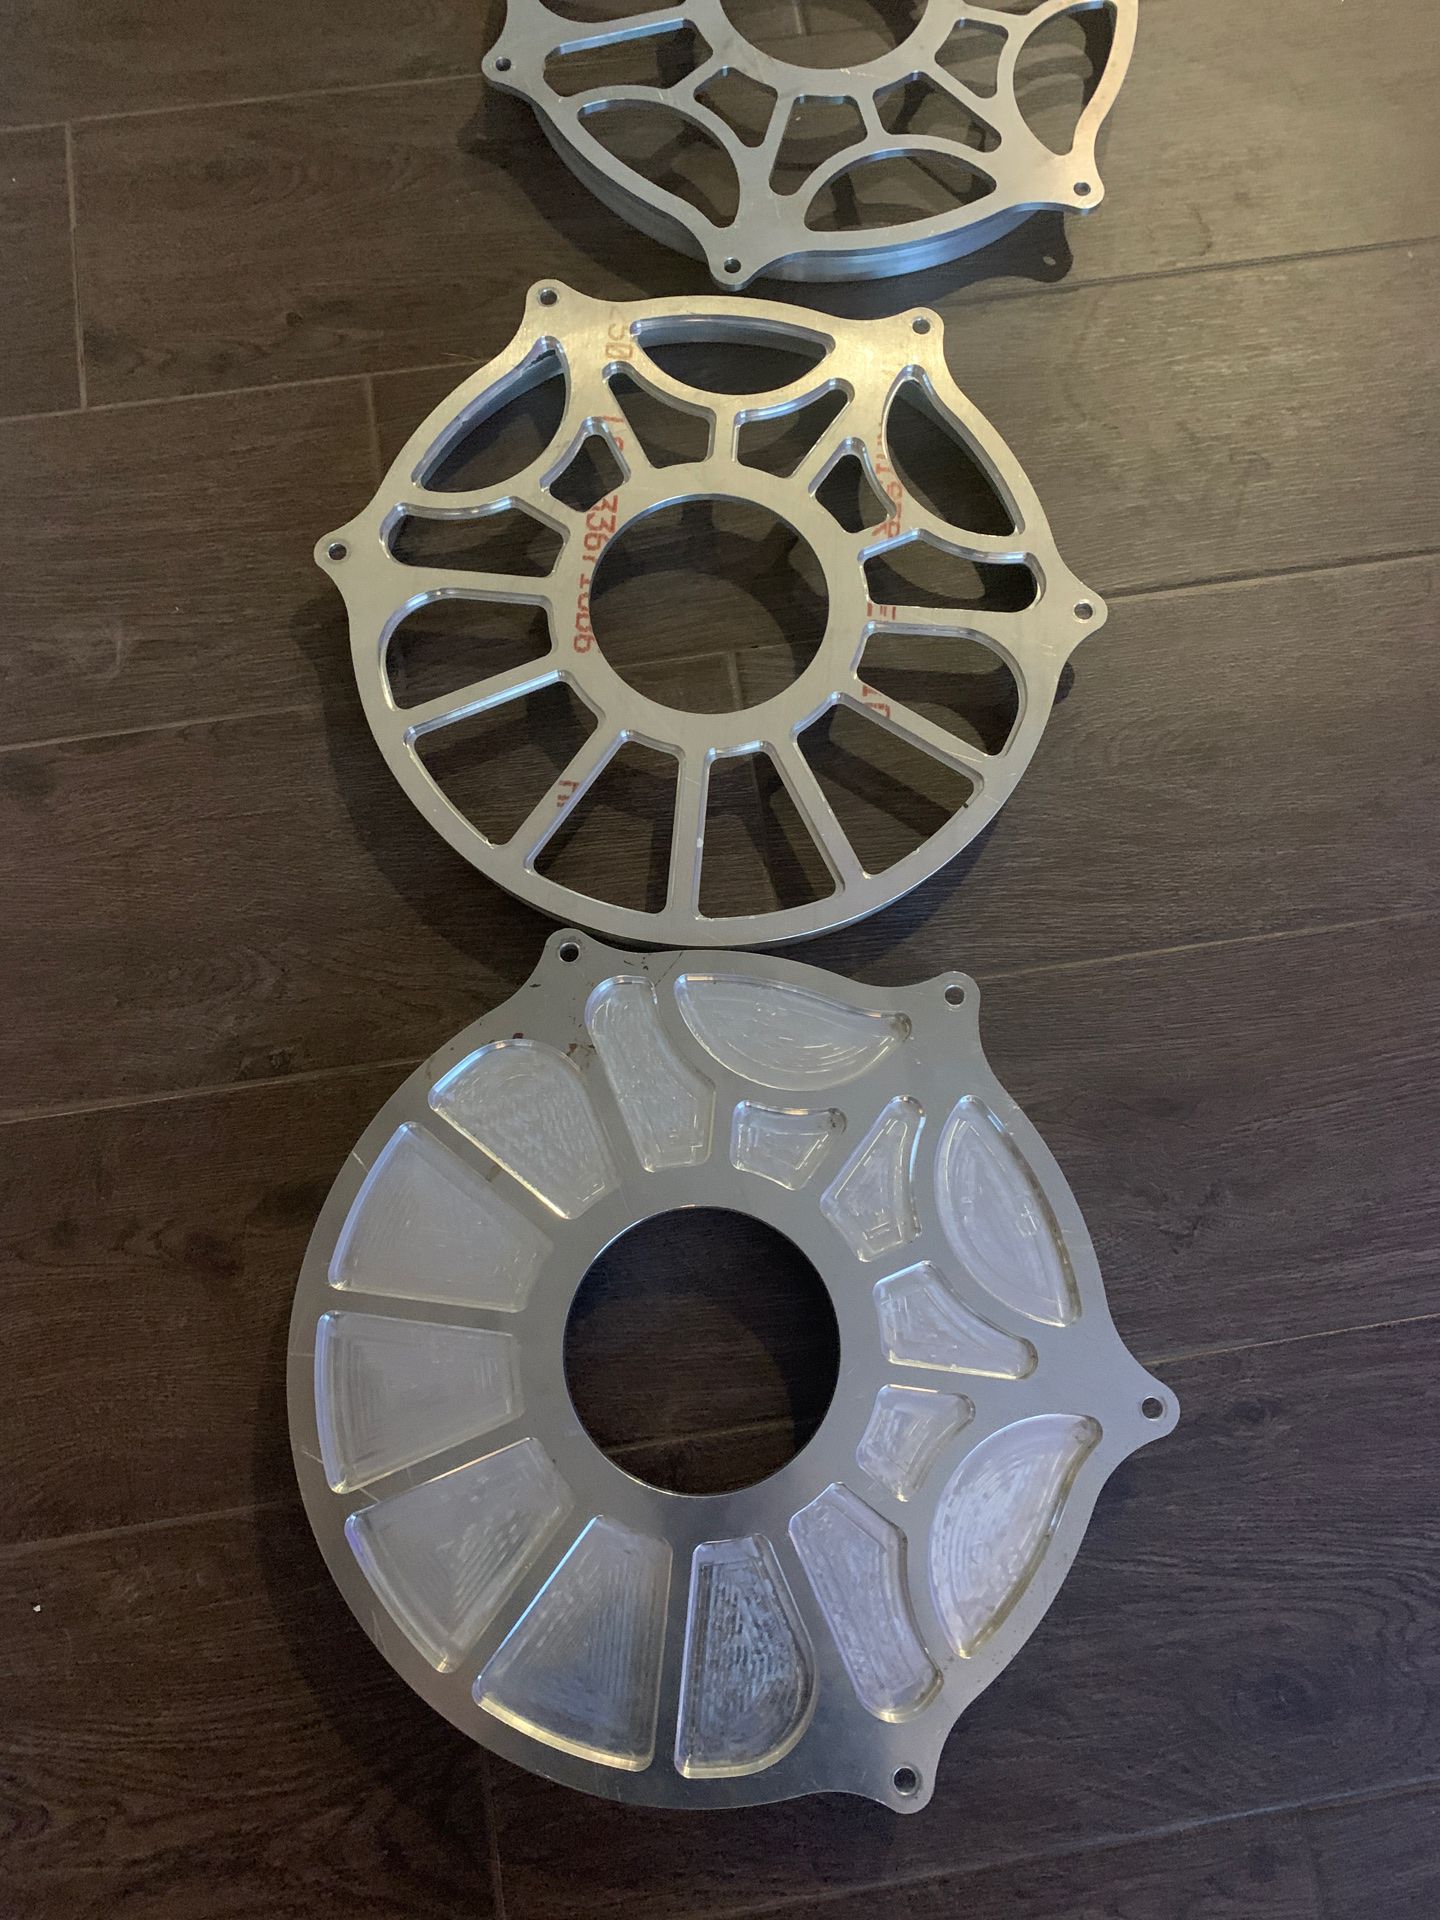 Jet boat v drive flywheel bellhousing big block Chevy flywheel covers. Cnc machined in house. Over 500 sold